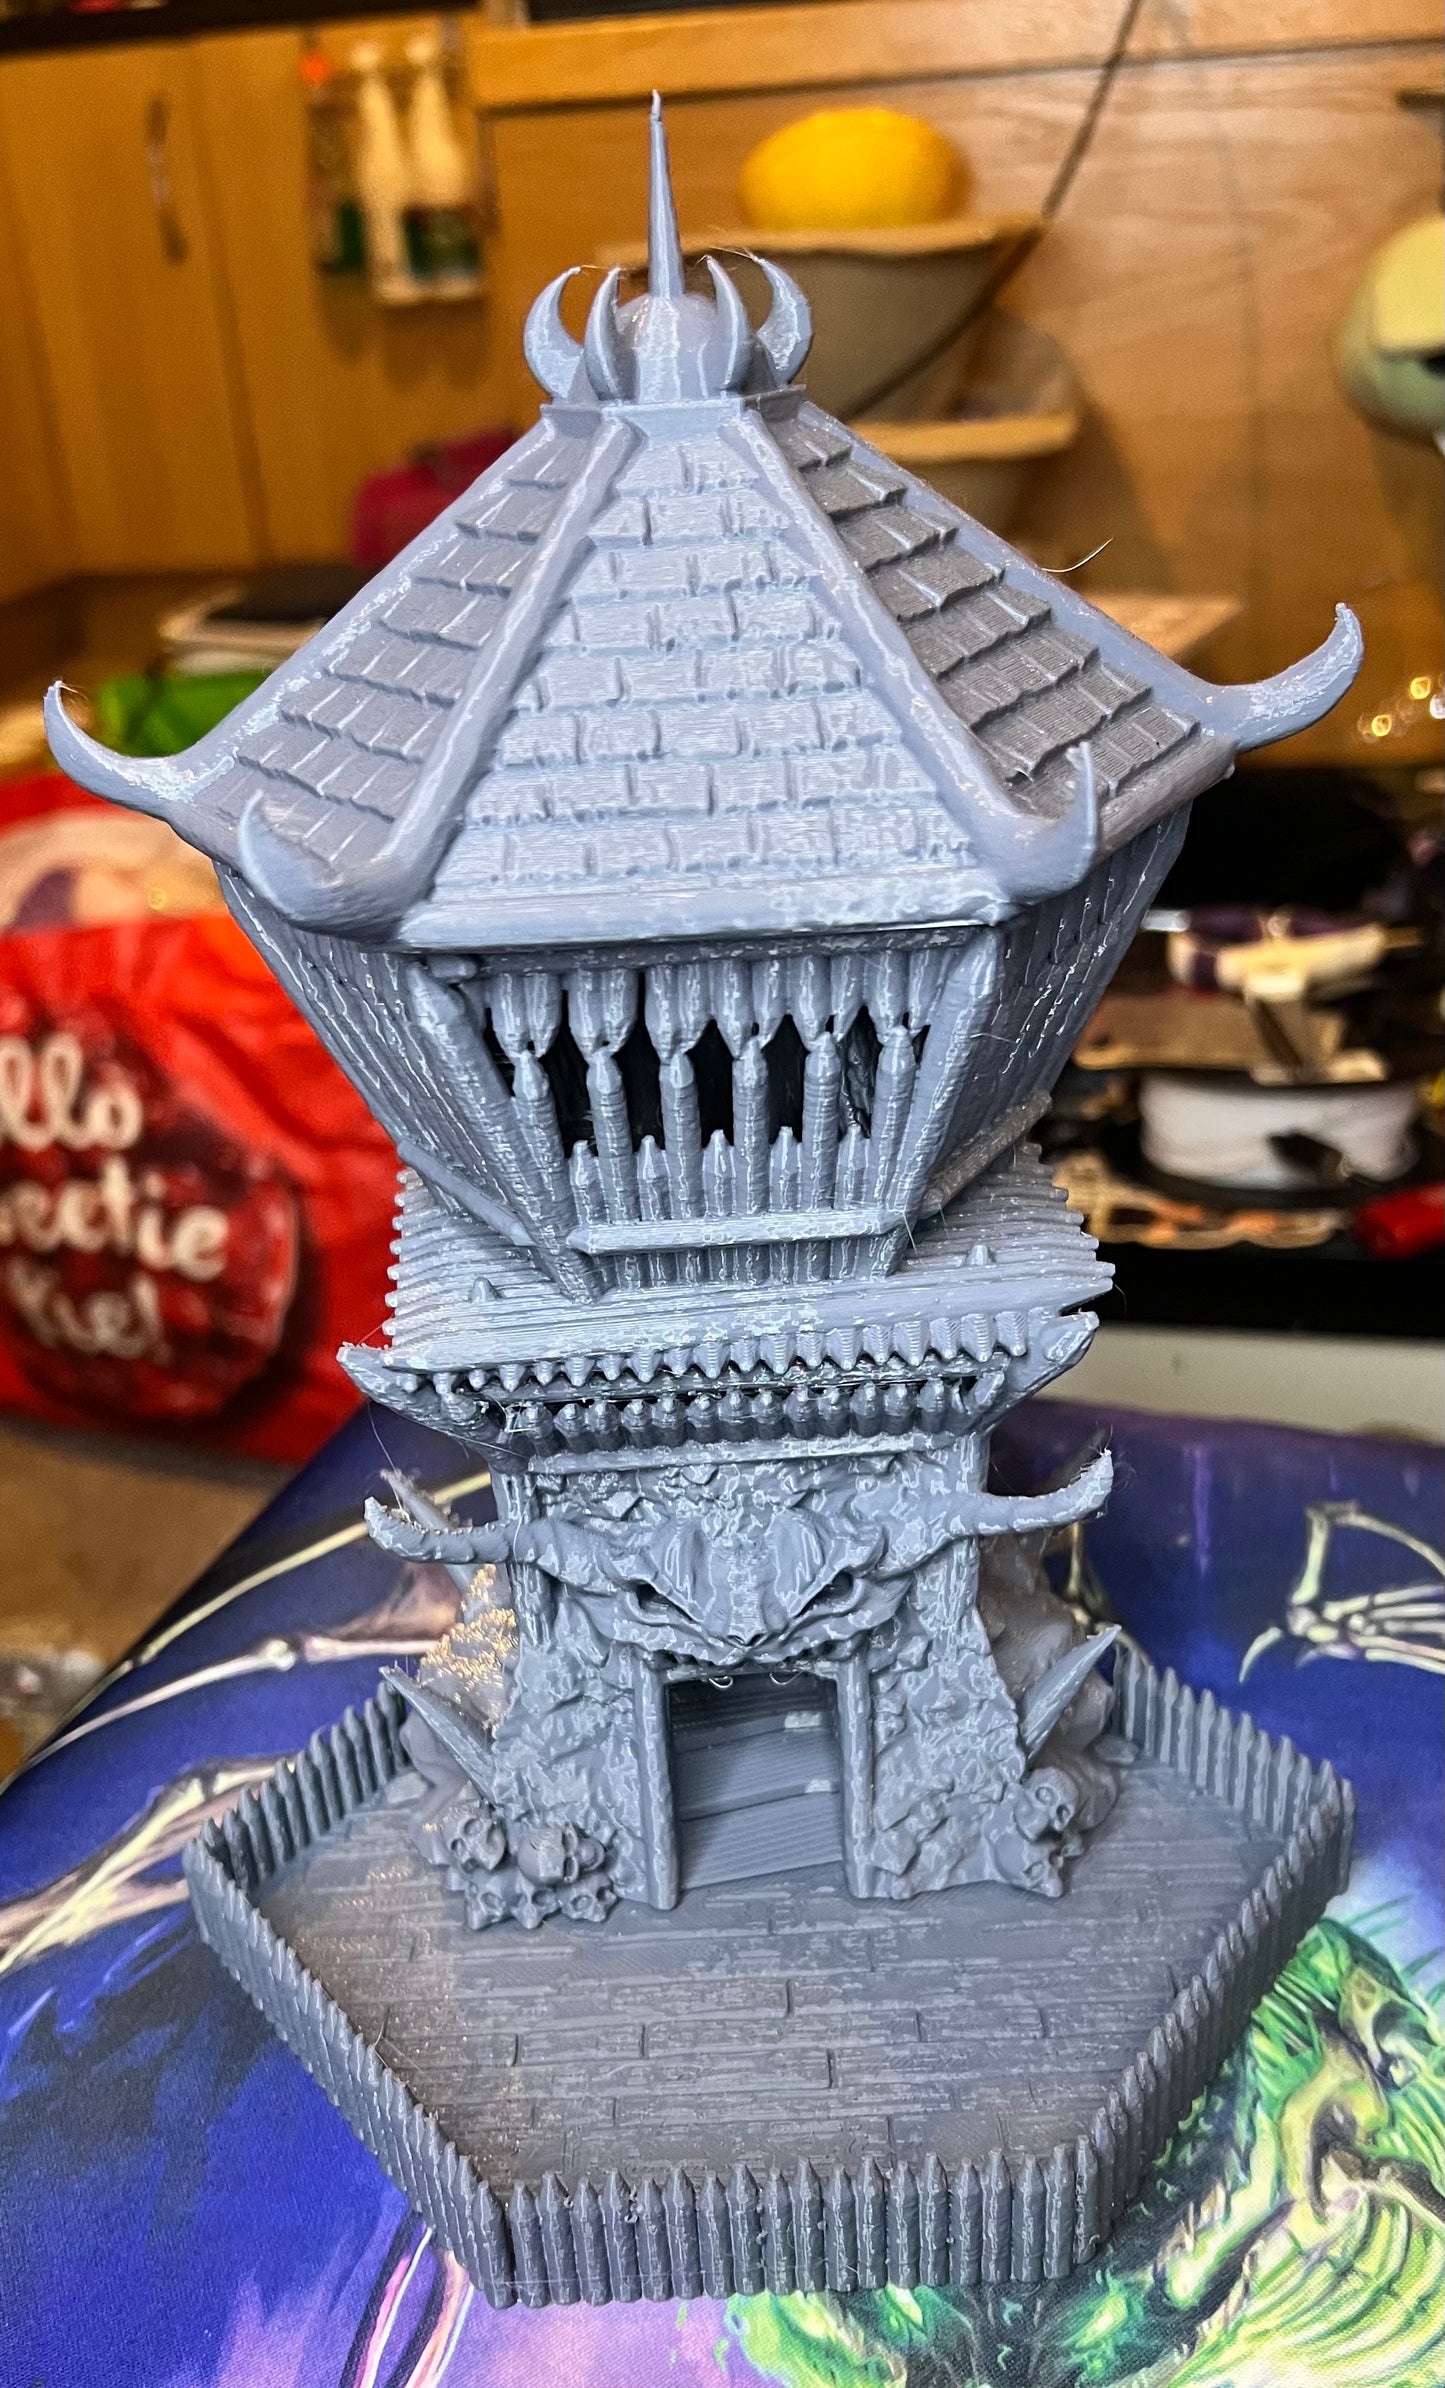 Fates End Barbarian Dice Tower - DnD, RPG, Call of Cthulhu, Dungeons and Dragons, Pathfinder, Table Top Gaming